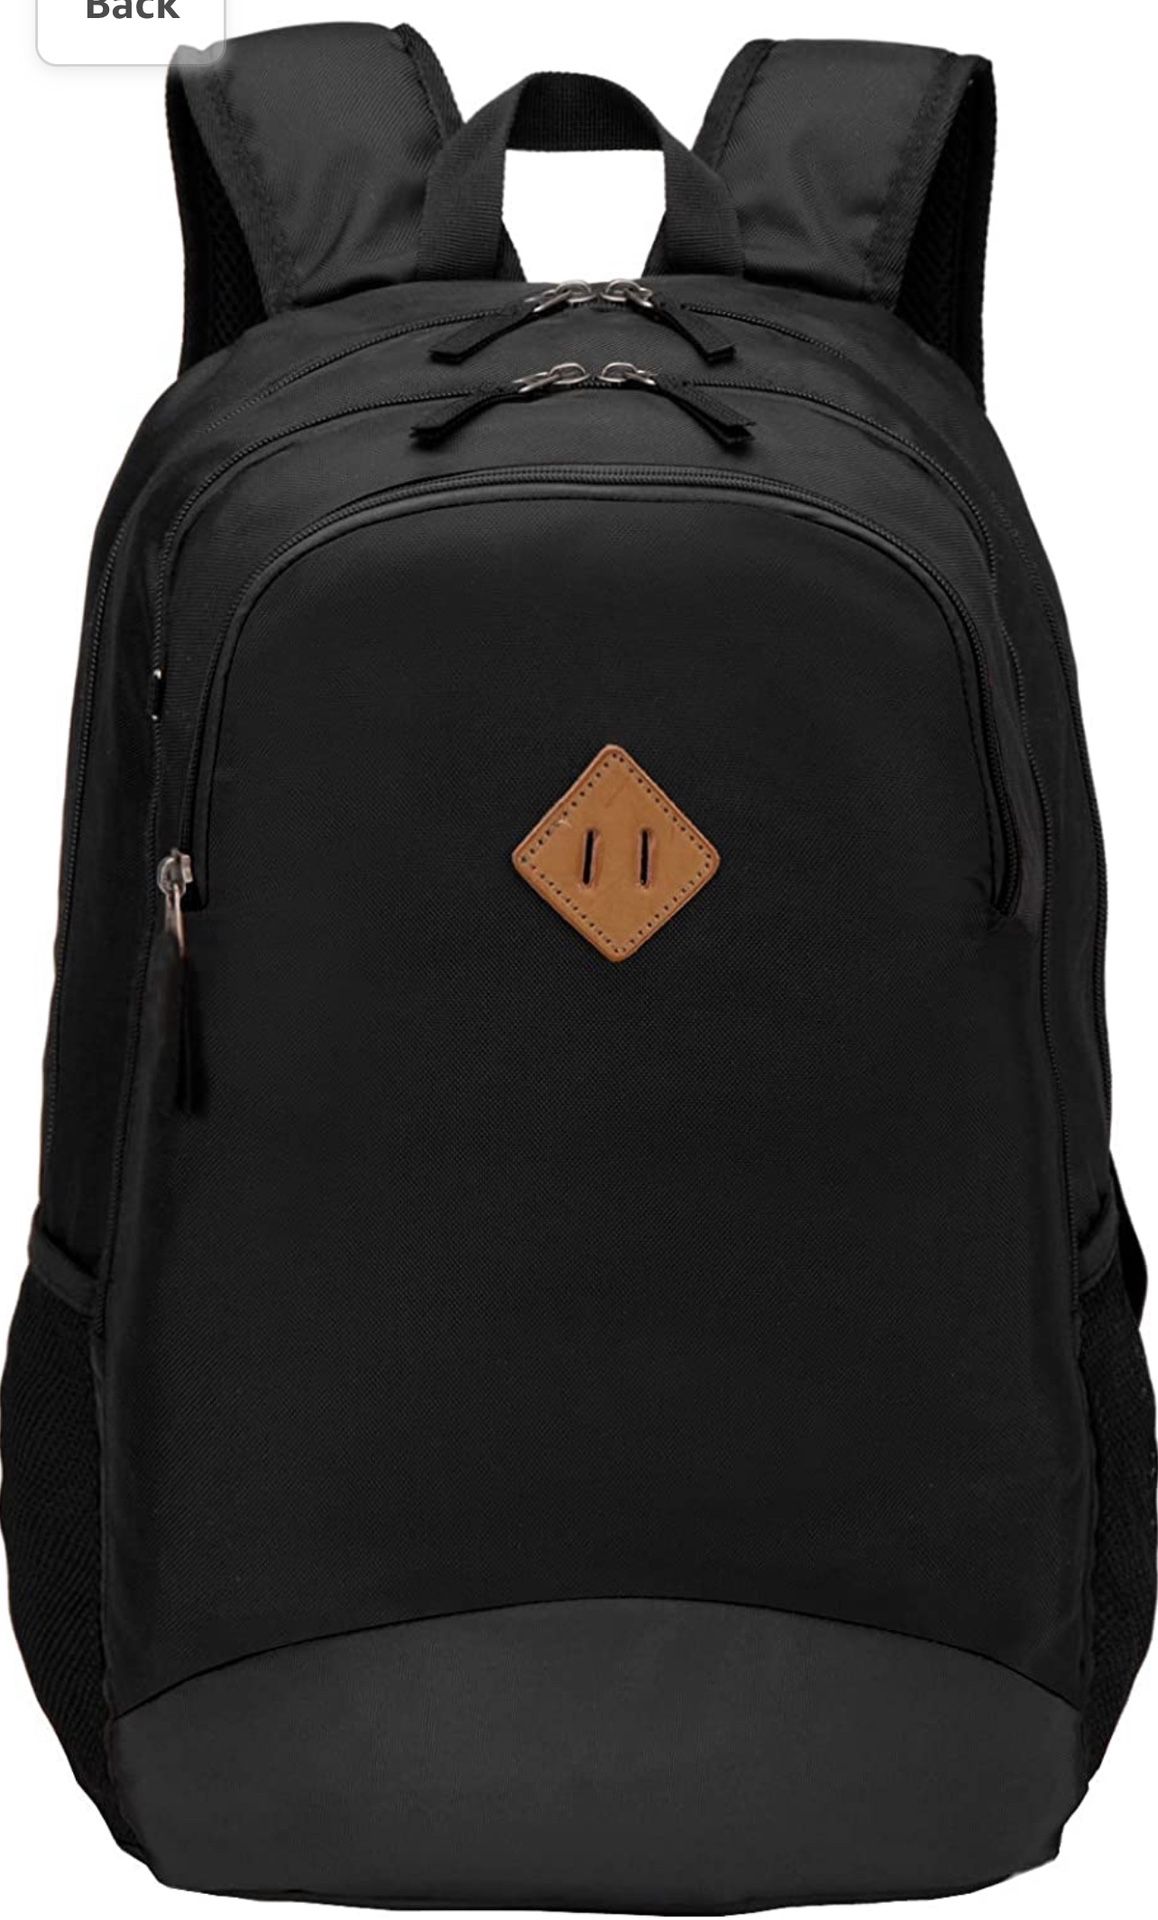 Classical Backpack for School or Work, Lightweight